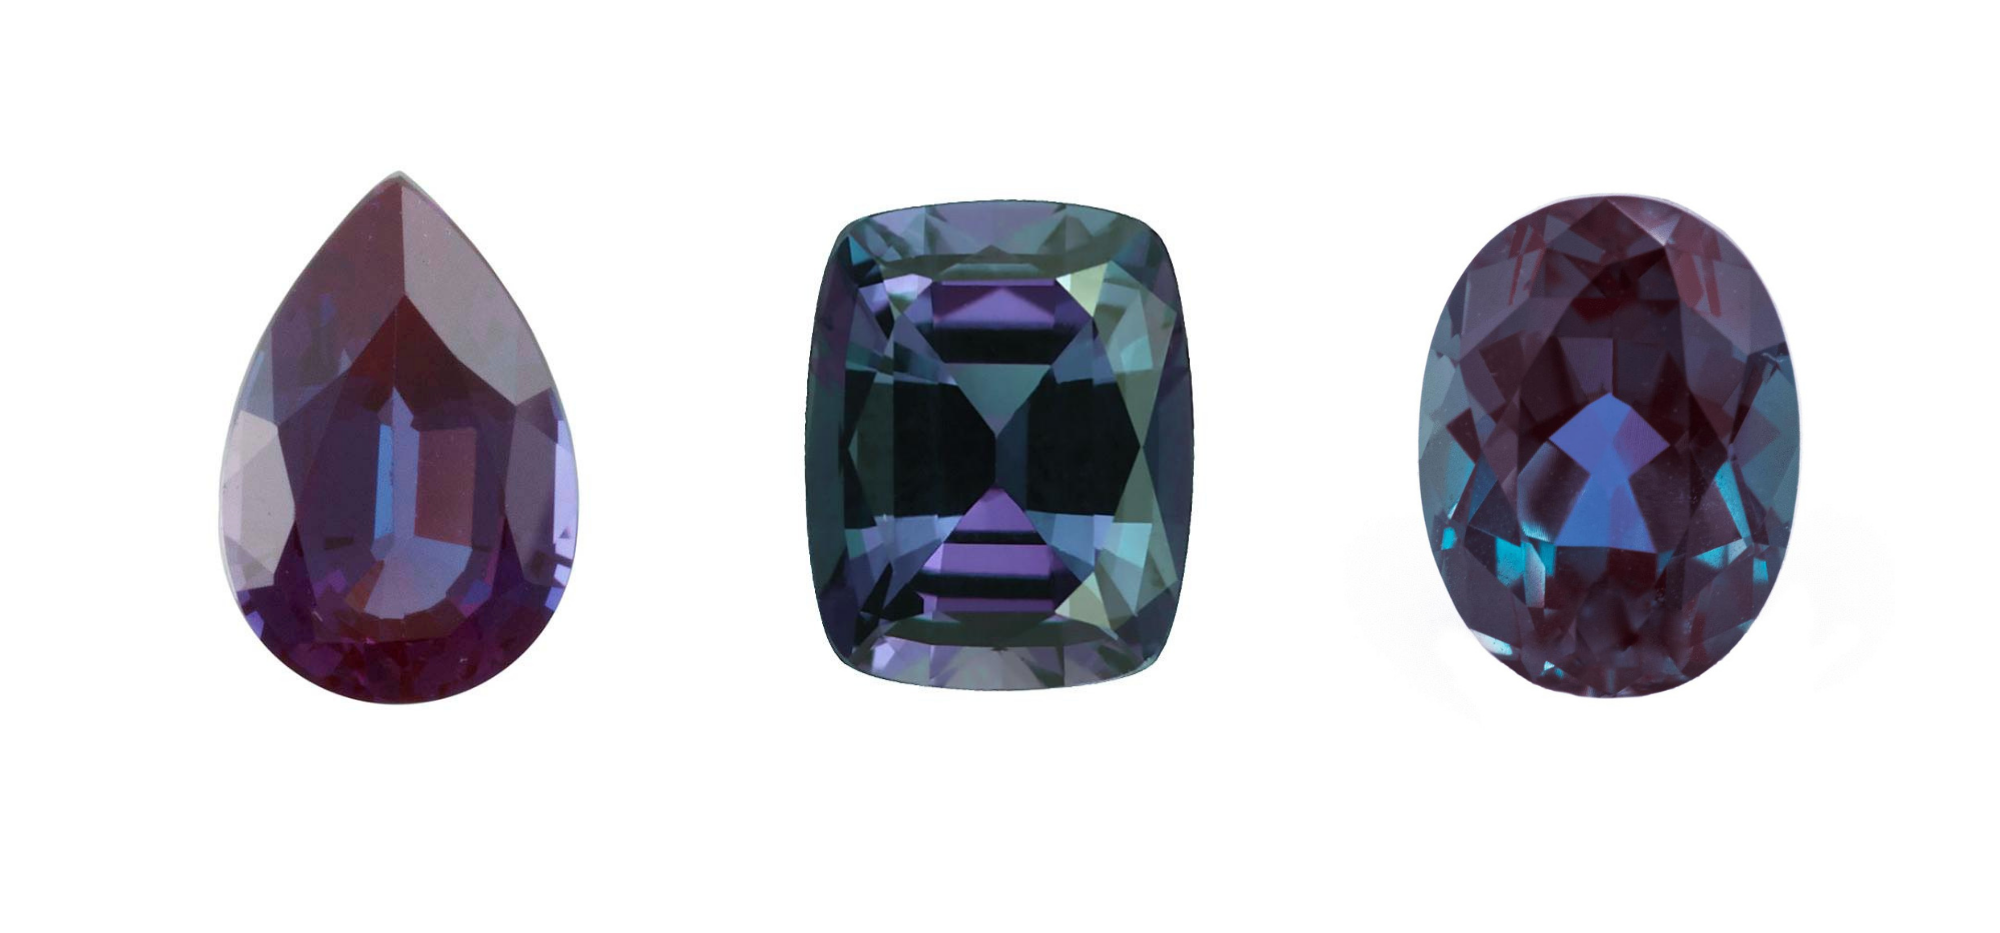 Various shapes and cuts of Alexandrite gemstones